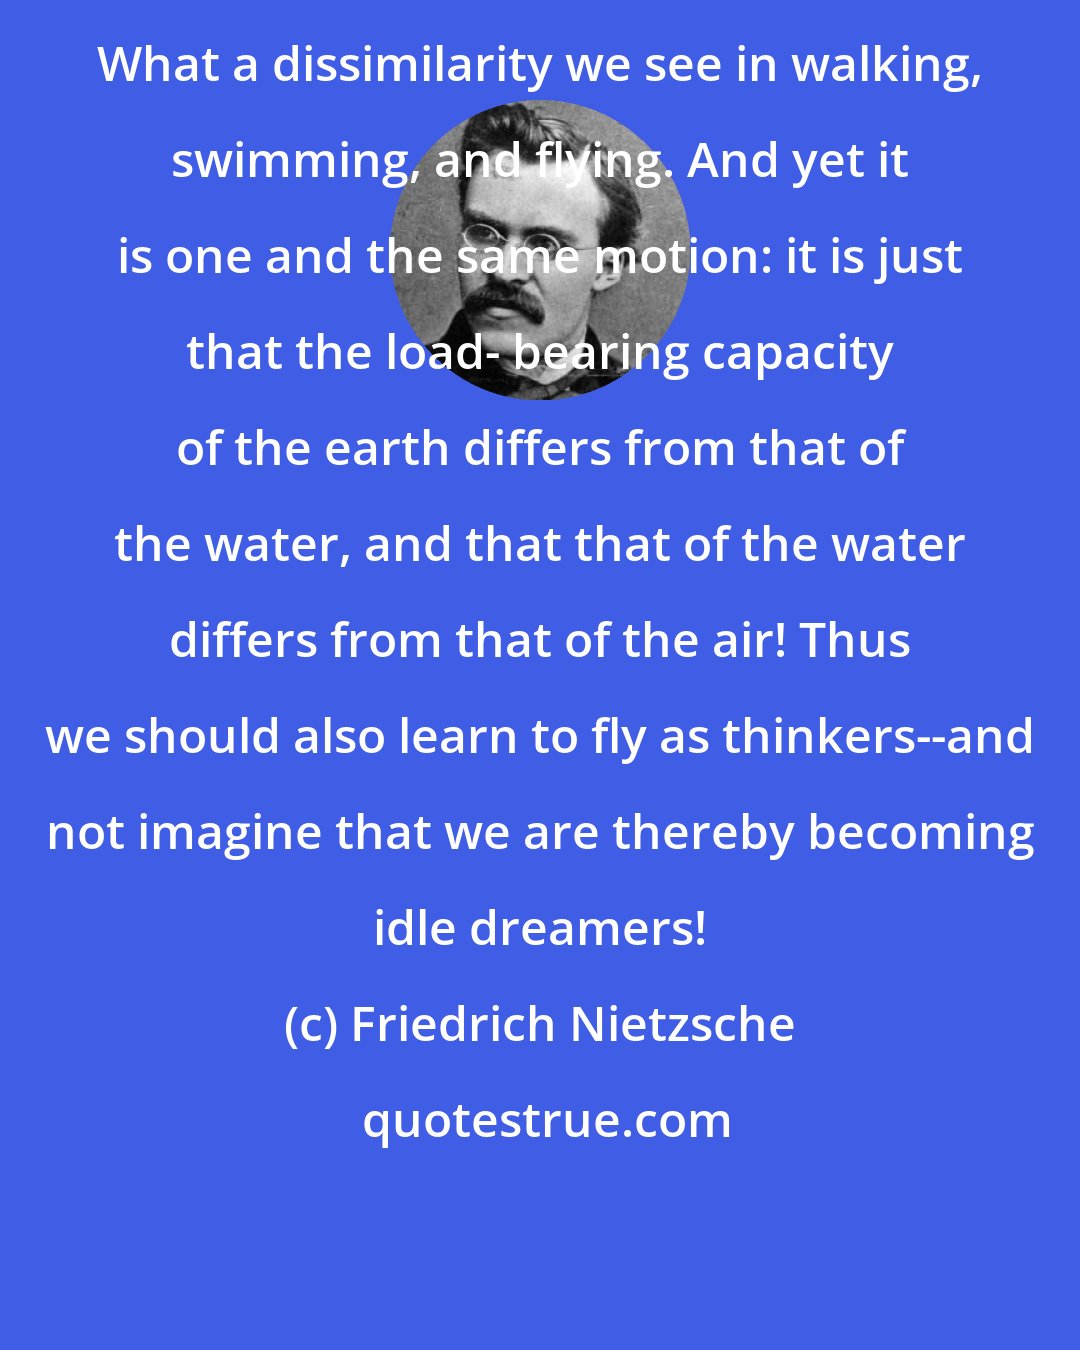 Friedrich Nietzsche: What a dissimilarity we see in walking, swimming, and flying. And yet it is one and the same motion: it is just that the load- bearing capacity of the earth differs from that of the water, and that that of the water differs from that of the air! Thus we should also learn to fly as thinkers--and not imagine that we are thereby becoming idle dreamers!